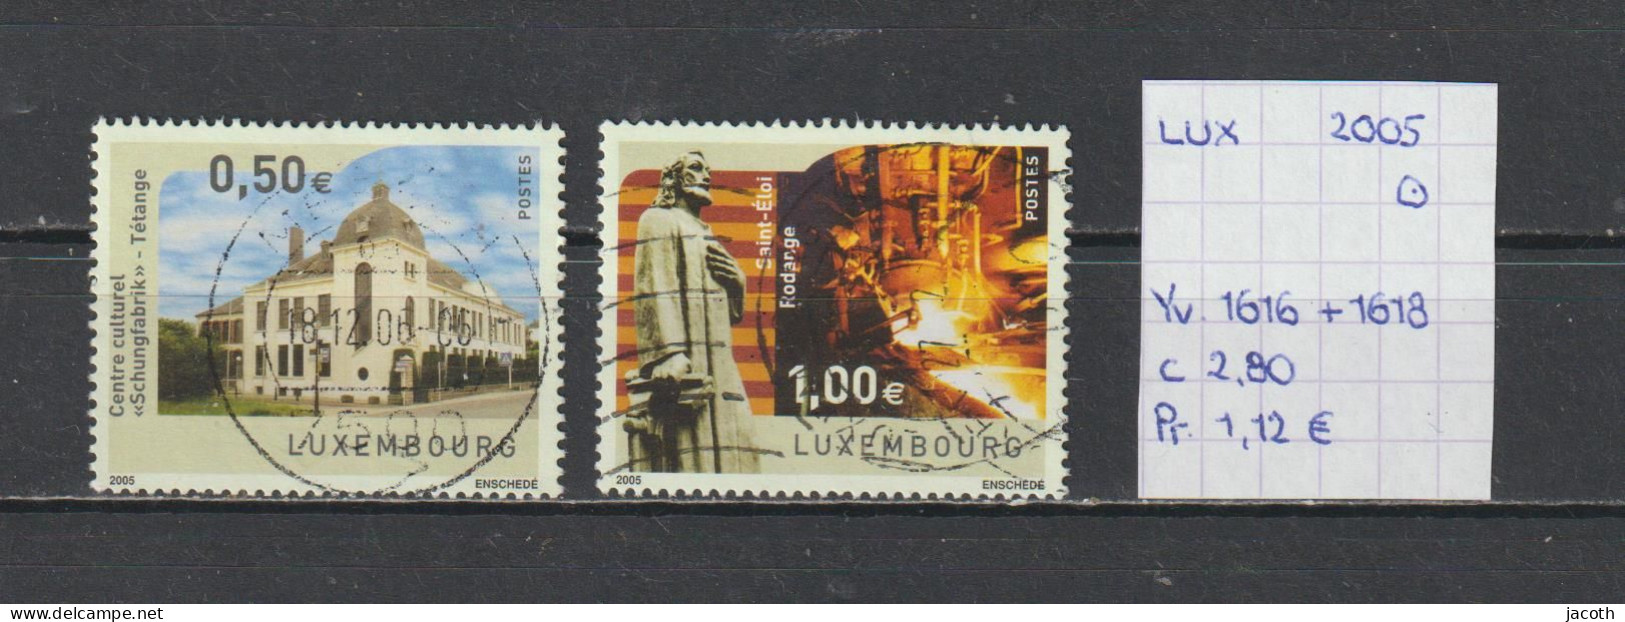 (TJ) Luxembourg 2005 - YT 1616 + 1618 (gest./obl./used) - Usados